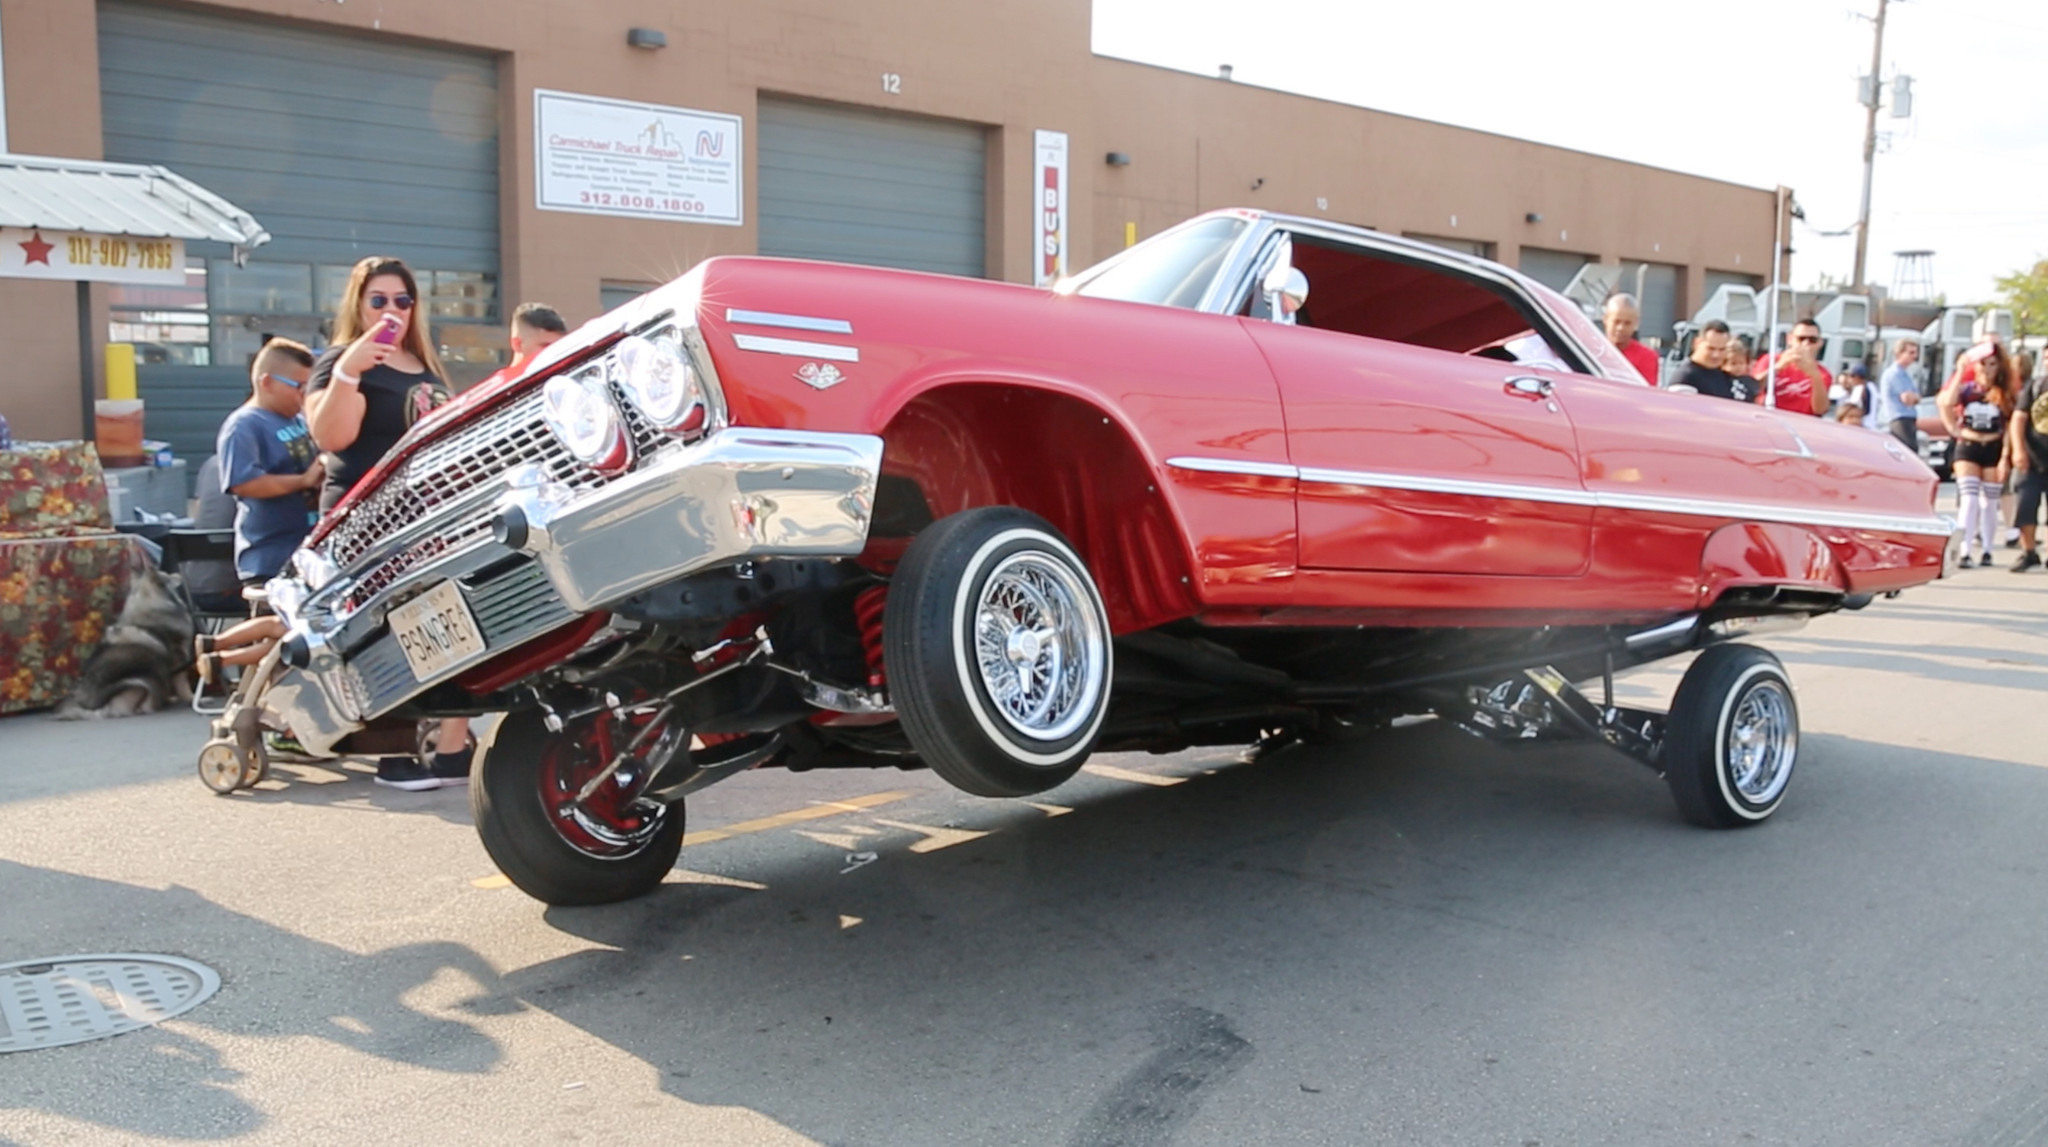 ct-hoy-in-chicago-lowrider-culture-is-a-